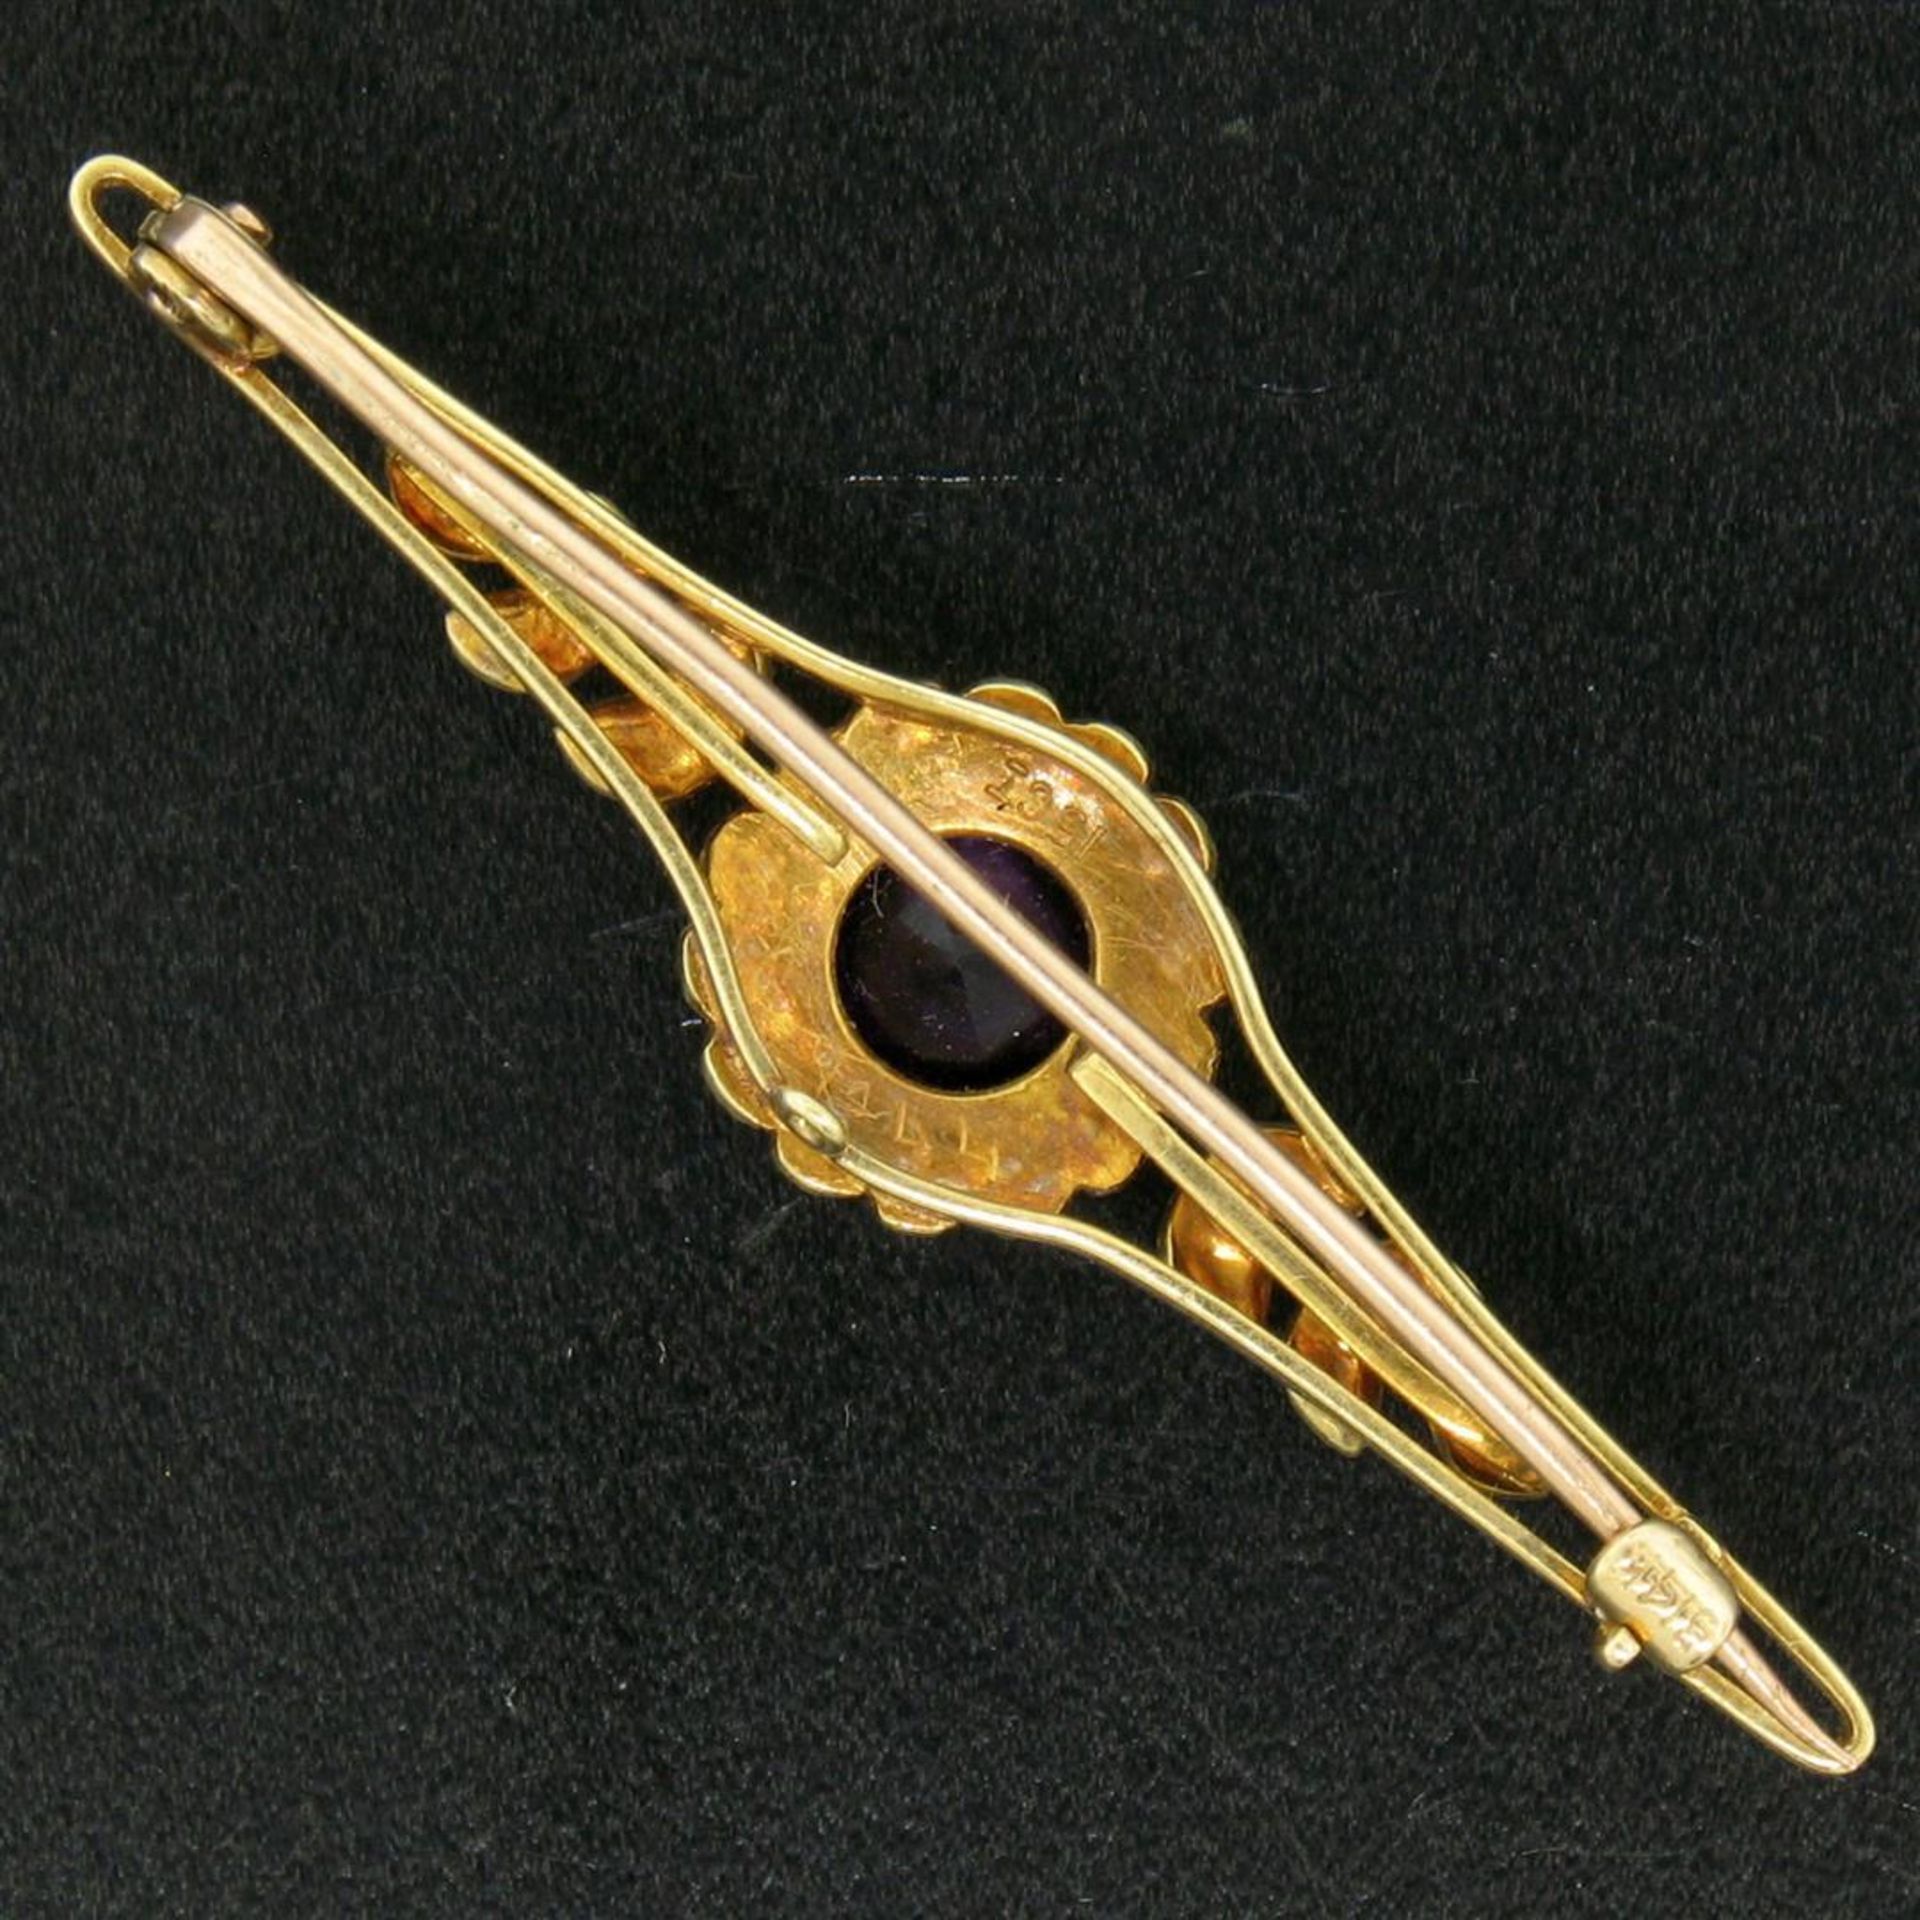 15k Yellow Gold .64 ct Old Cut Amethyst & Seed Pearl Brooch Pin - Image 6 of 8